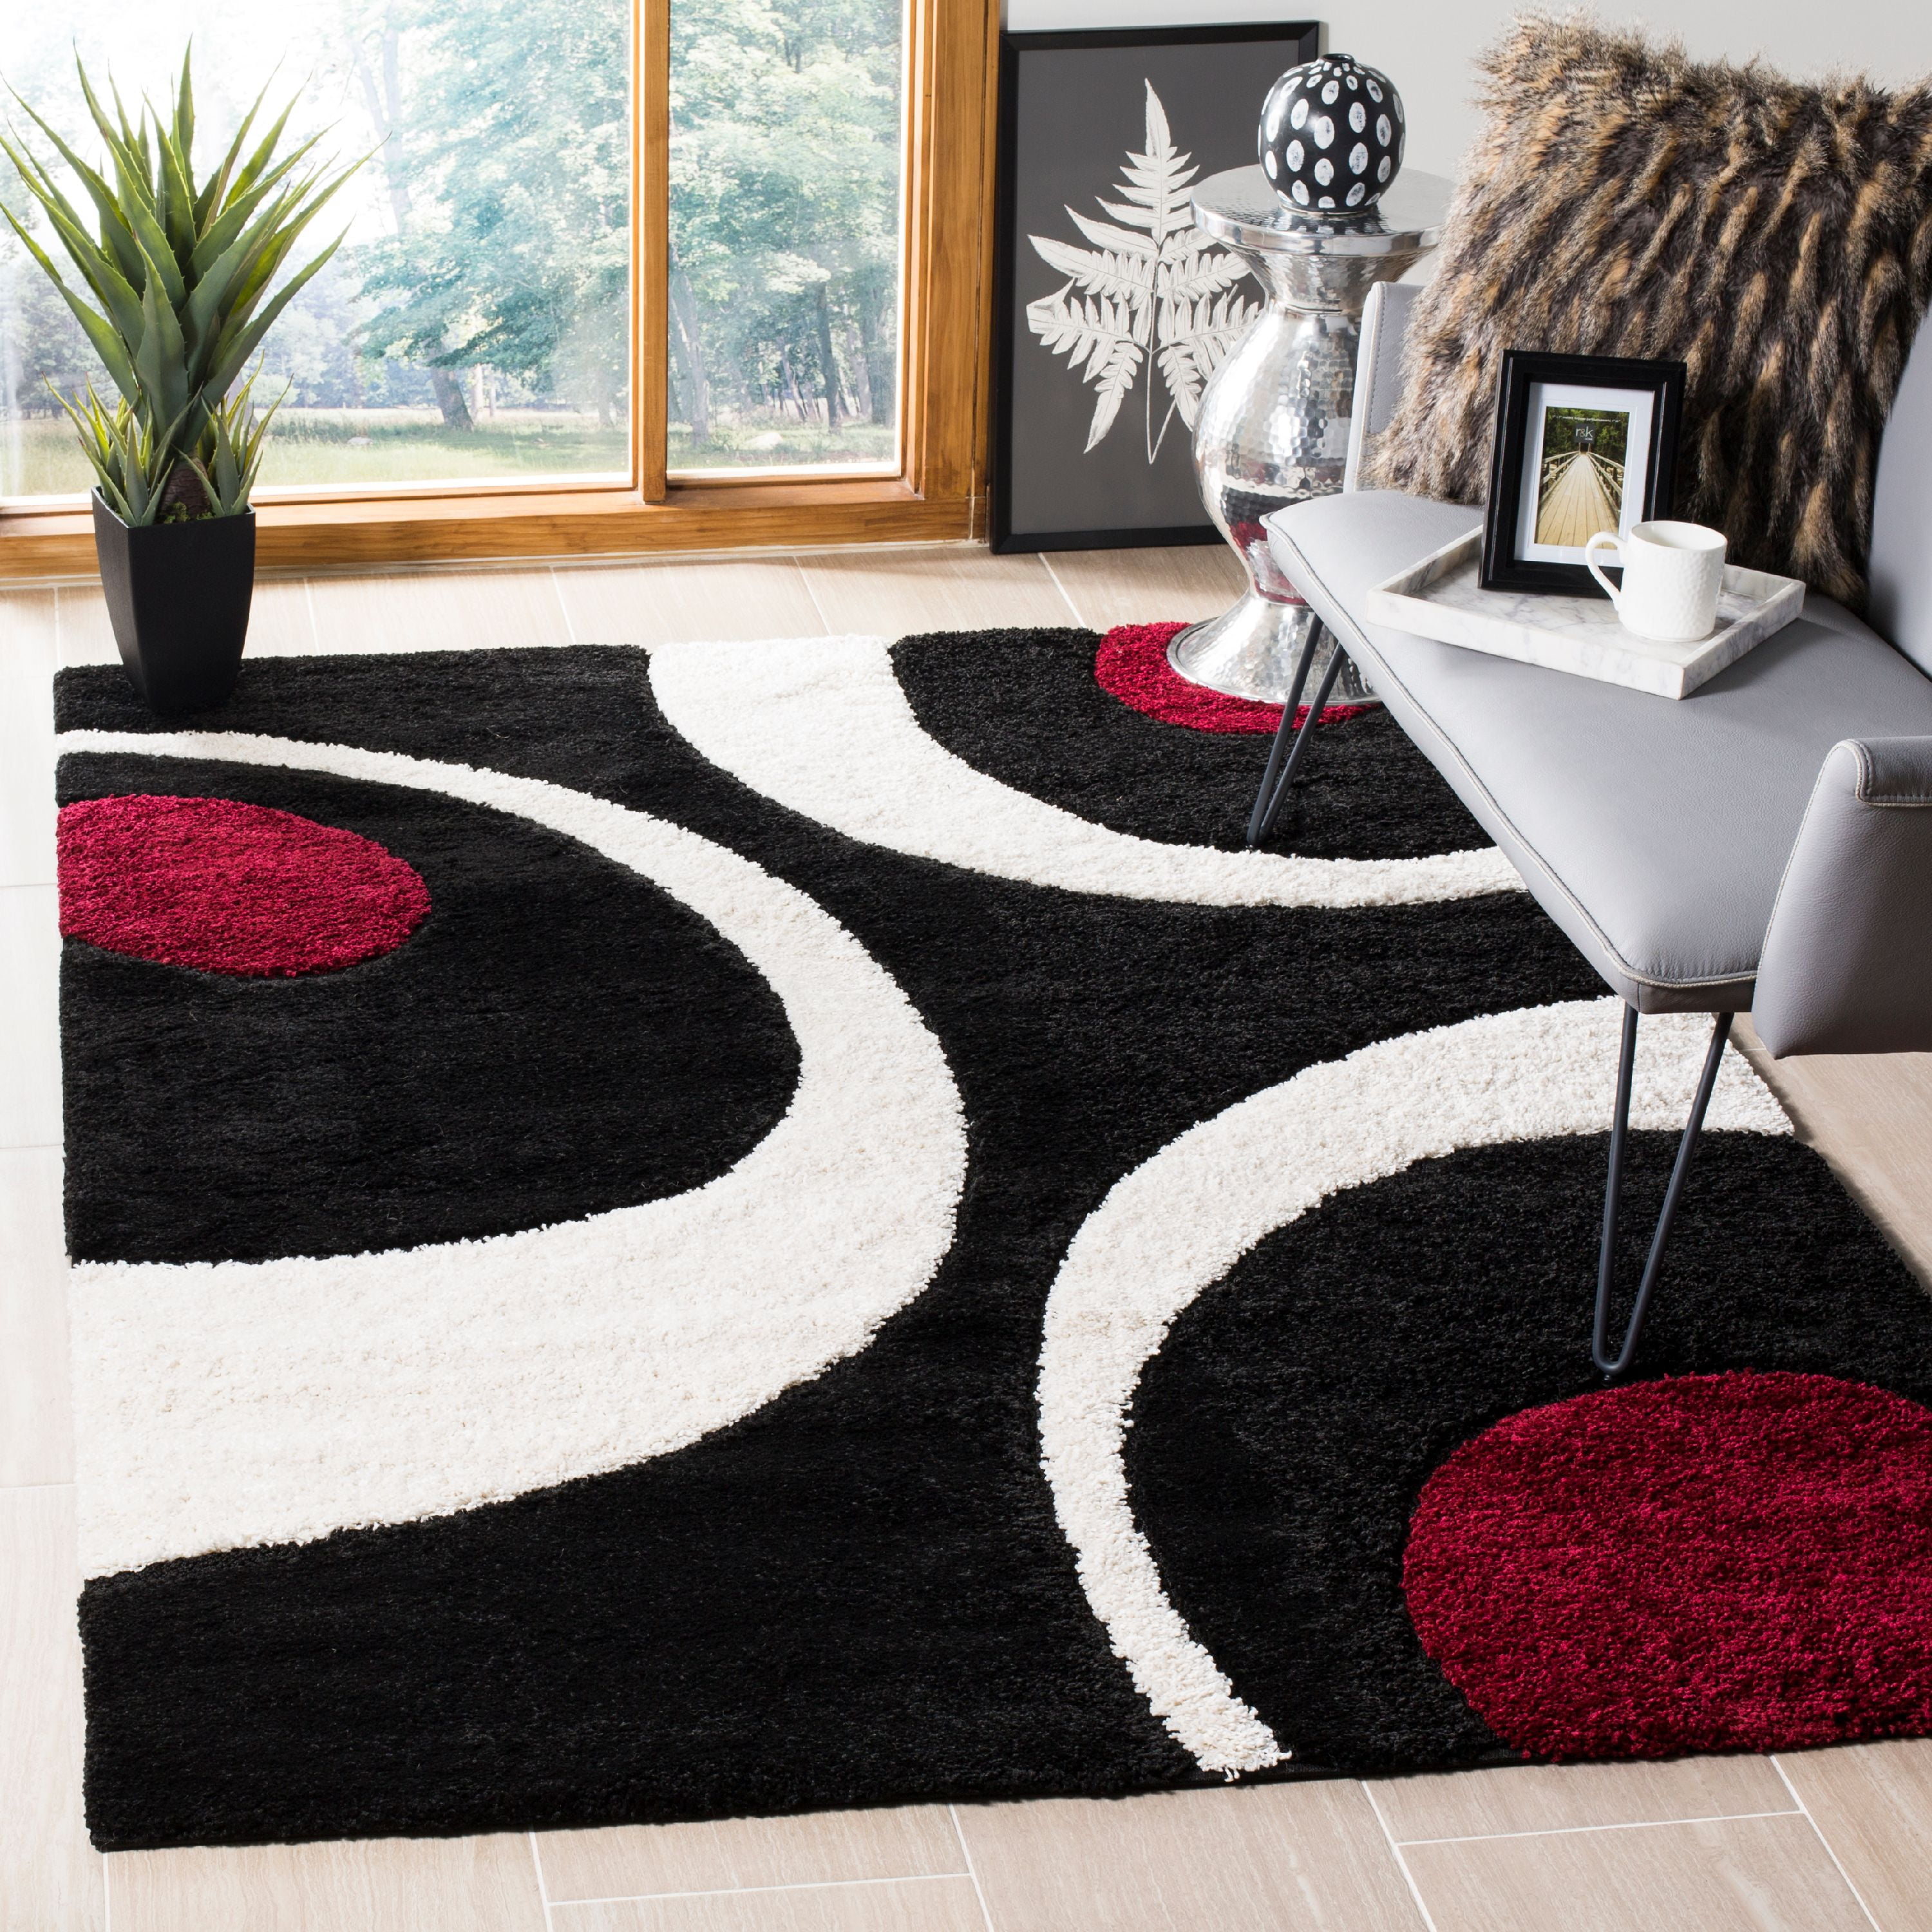 MystiqueDecors 4x6' Rug for Living Room - Natural White & Black Checke –  MystiqueDecors By AK